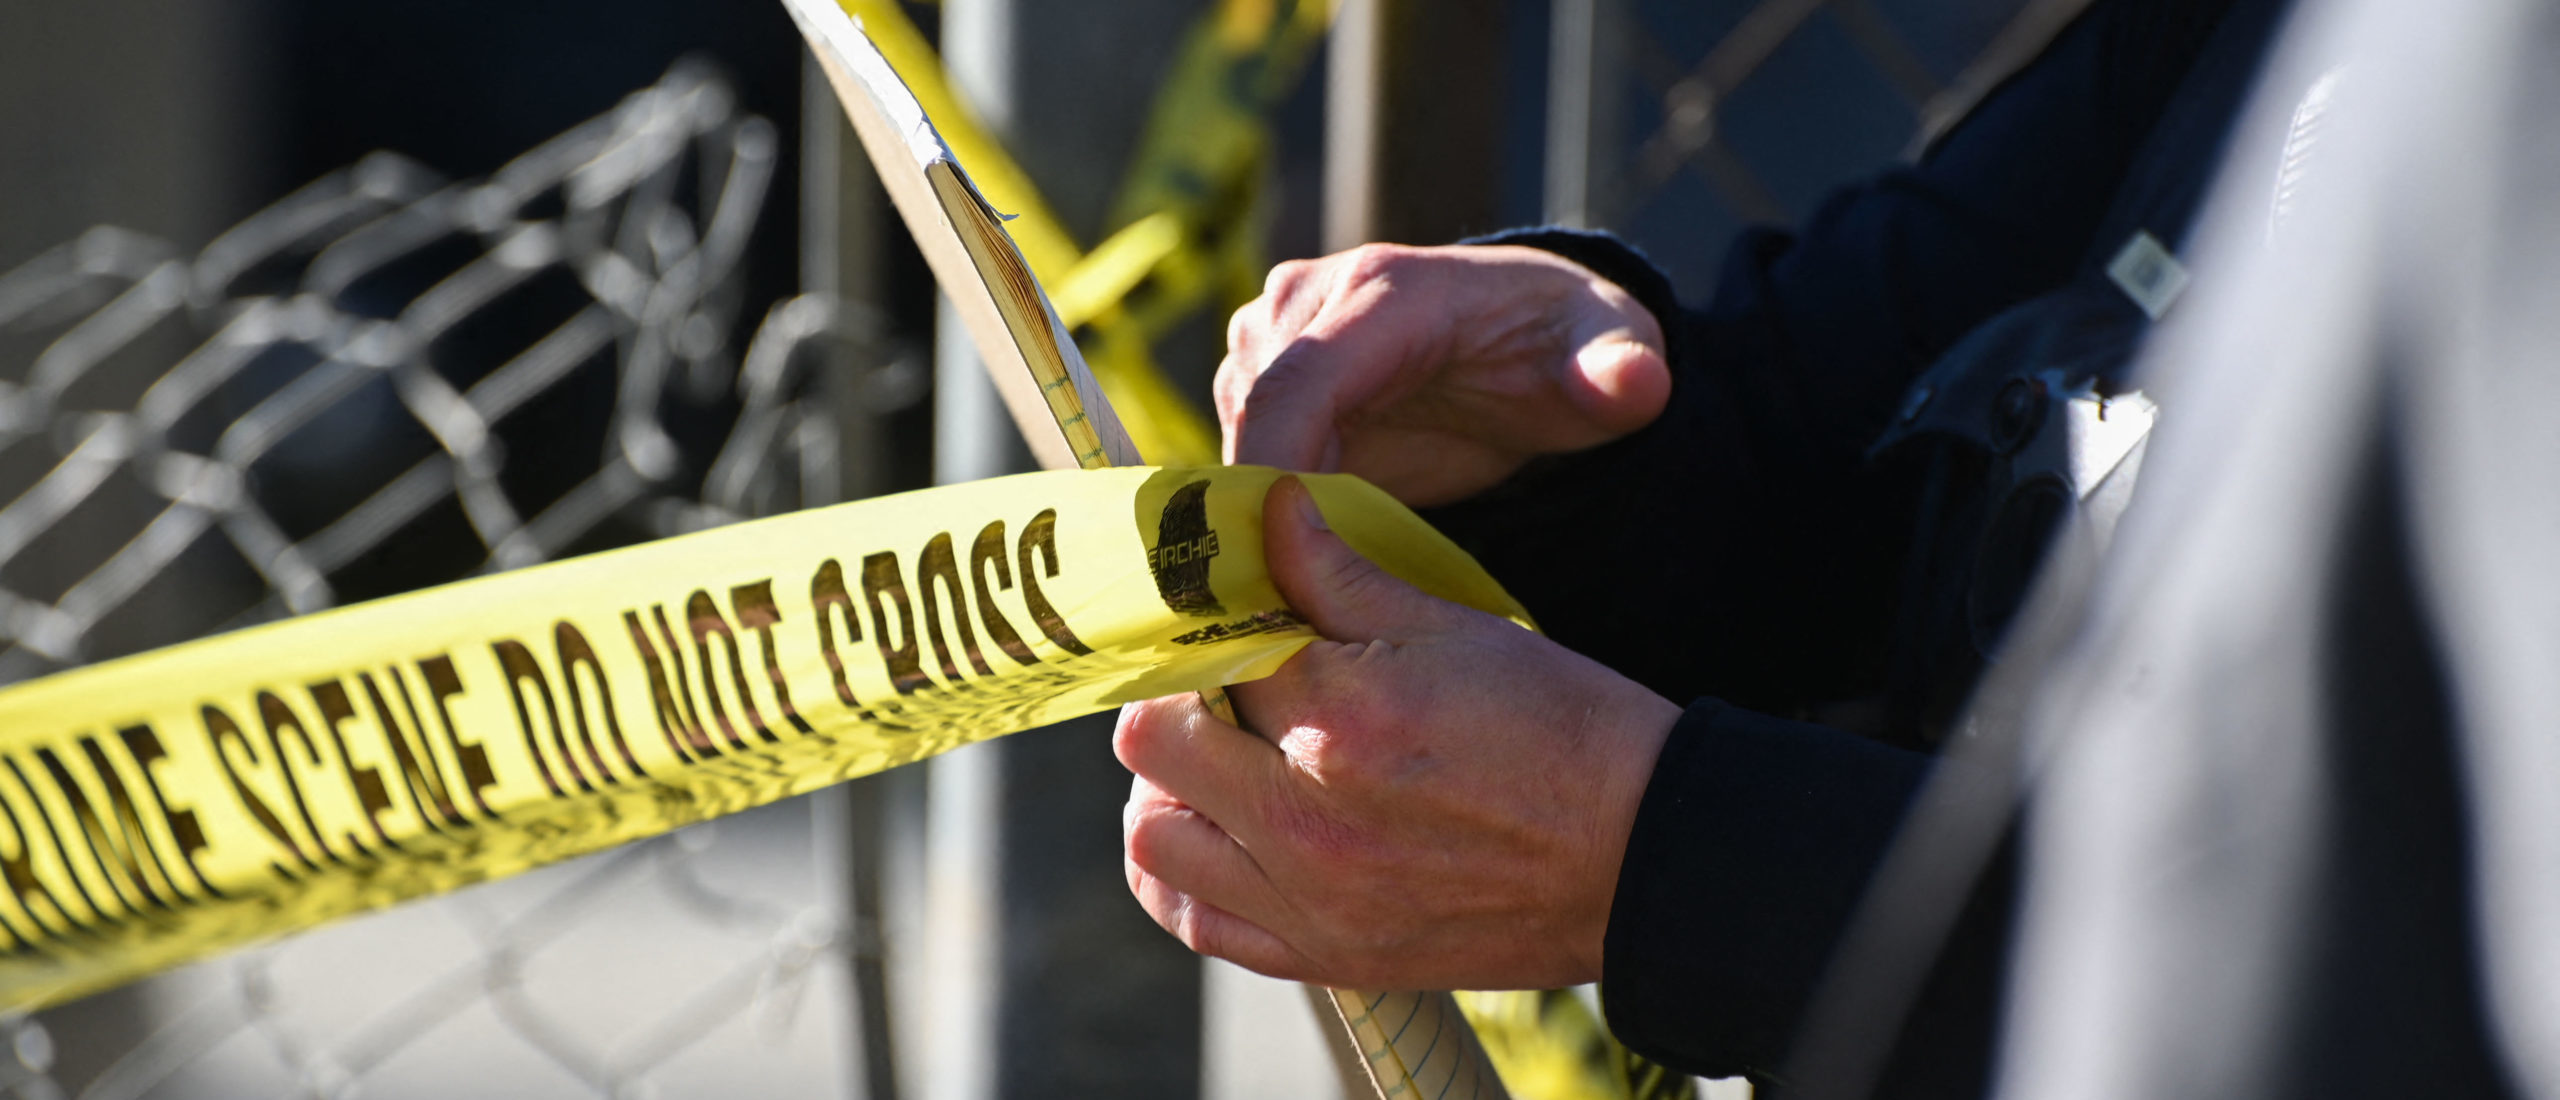 A San Mateo County Sheriff officer puts up police tape at a crime scene after a shooting at the Spanish Town shops in Half Moon Bay, California, on January 24, 2023. - A suspected gunman was in custody Monday over the killing of seven people in a rural community in northern California, just two days after a mass shooting at a Lunar New Year celebration near Los Angeles. Police line do not cross (Photo by SAMANTHA LAUREY/AFP via Getty Images)